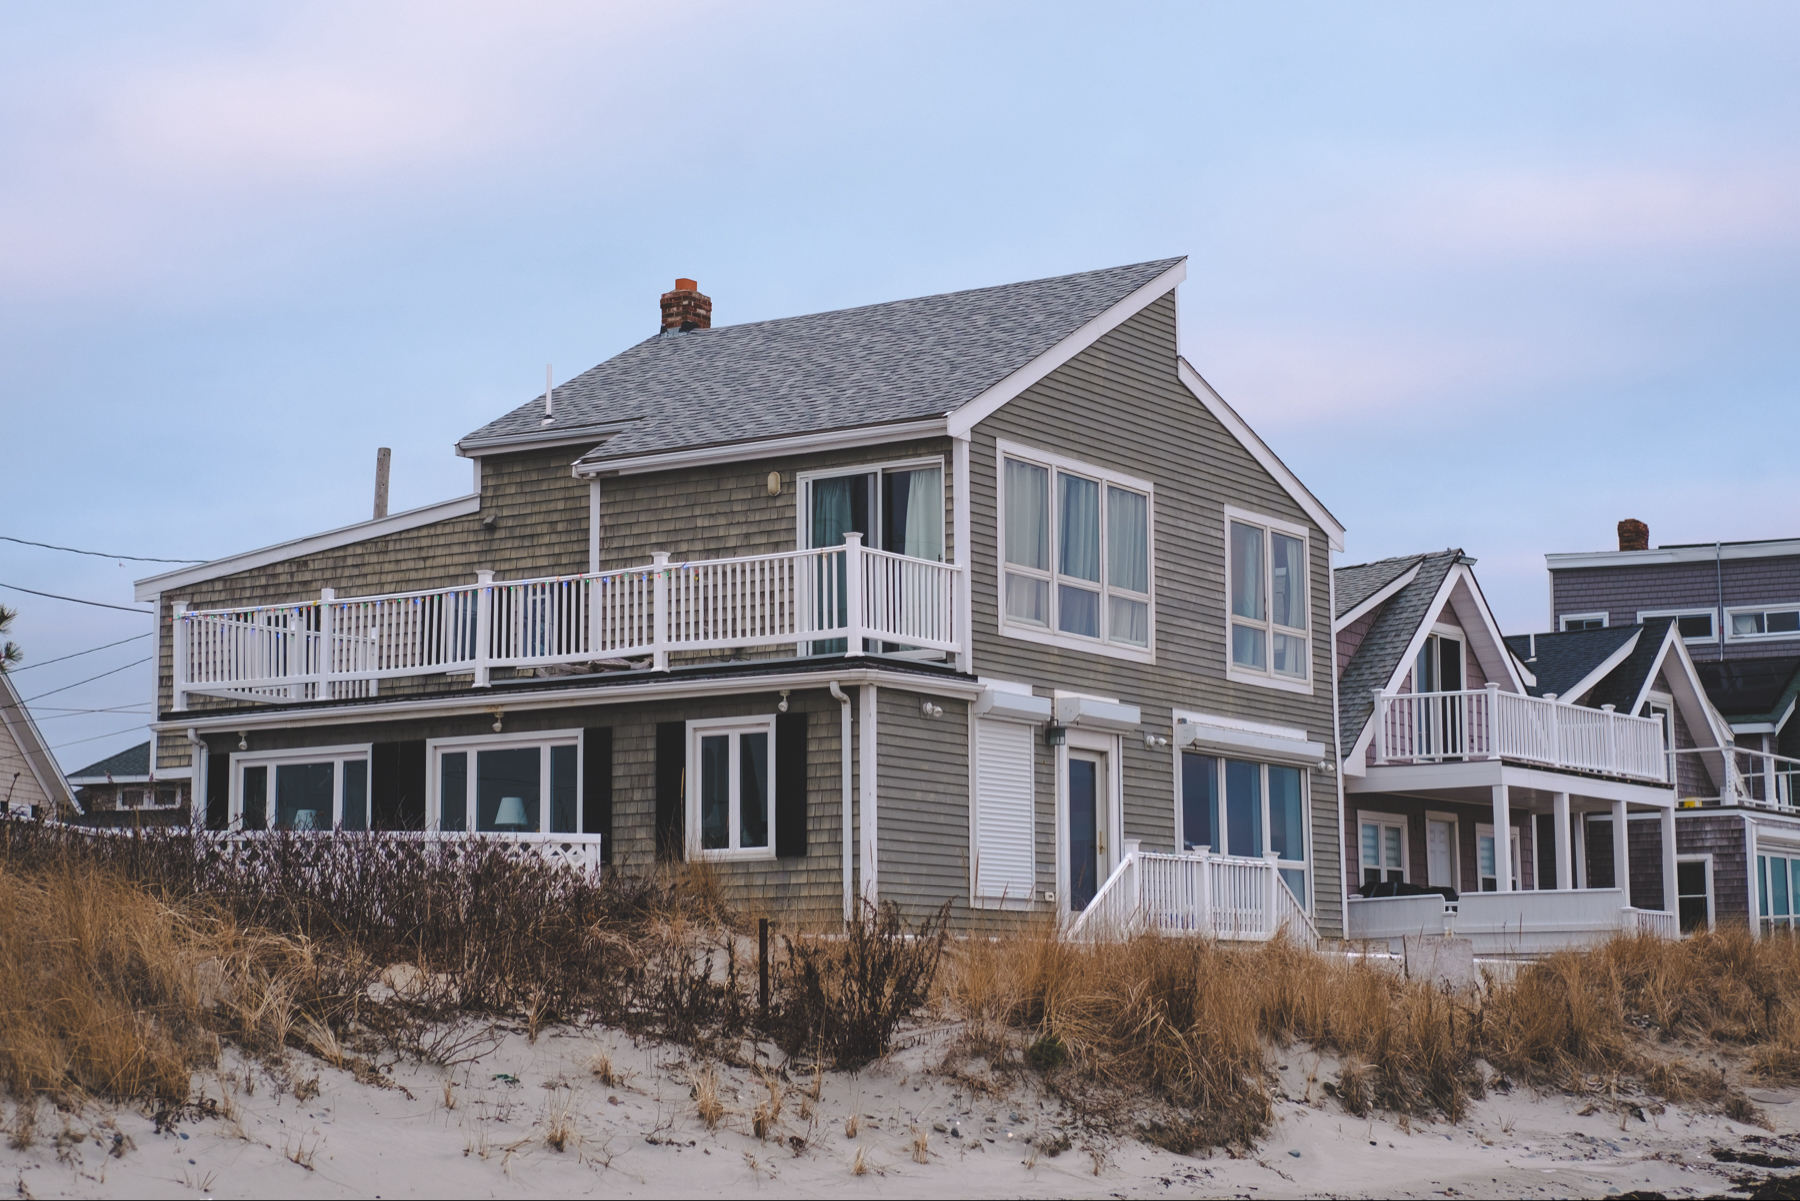 A beachfront house with gray siding and white railings sits on sandy ground with sparse grass. An overcast sky looms above.